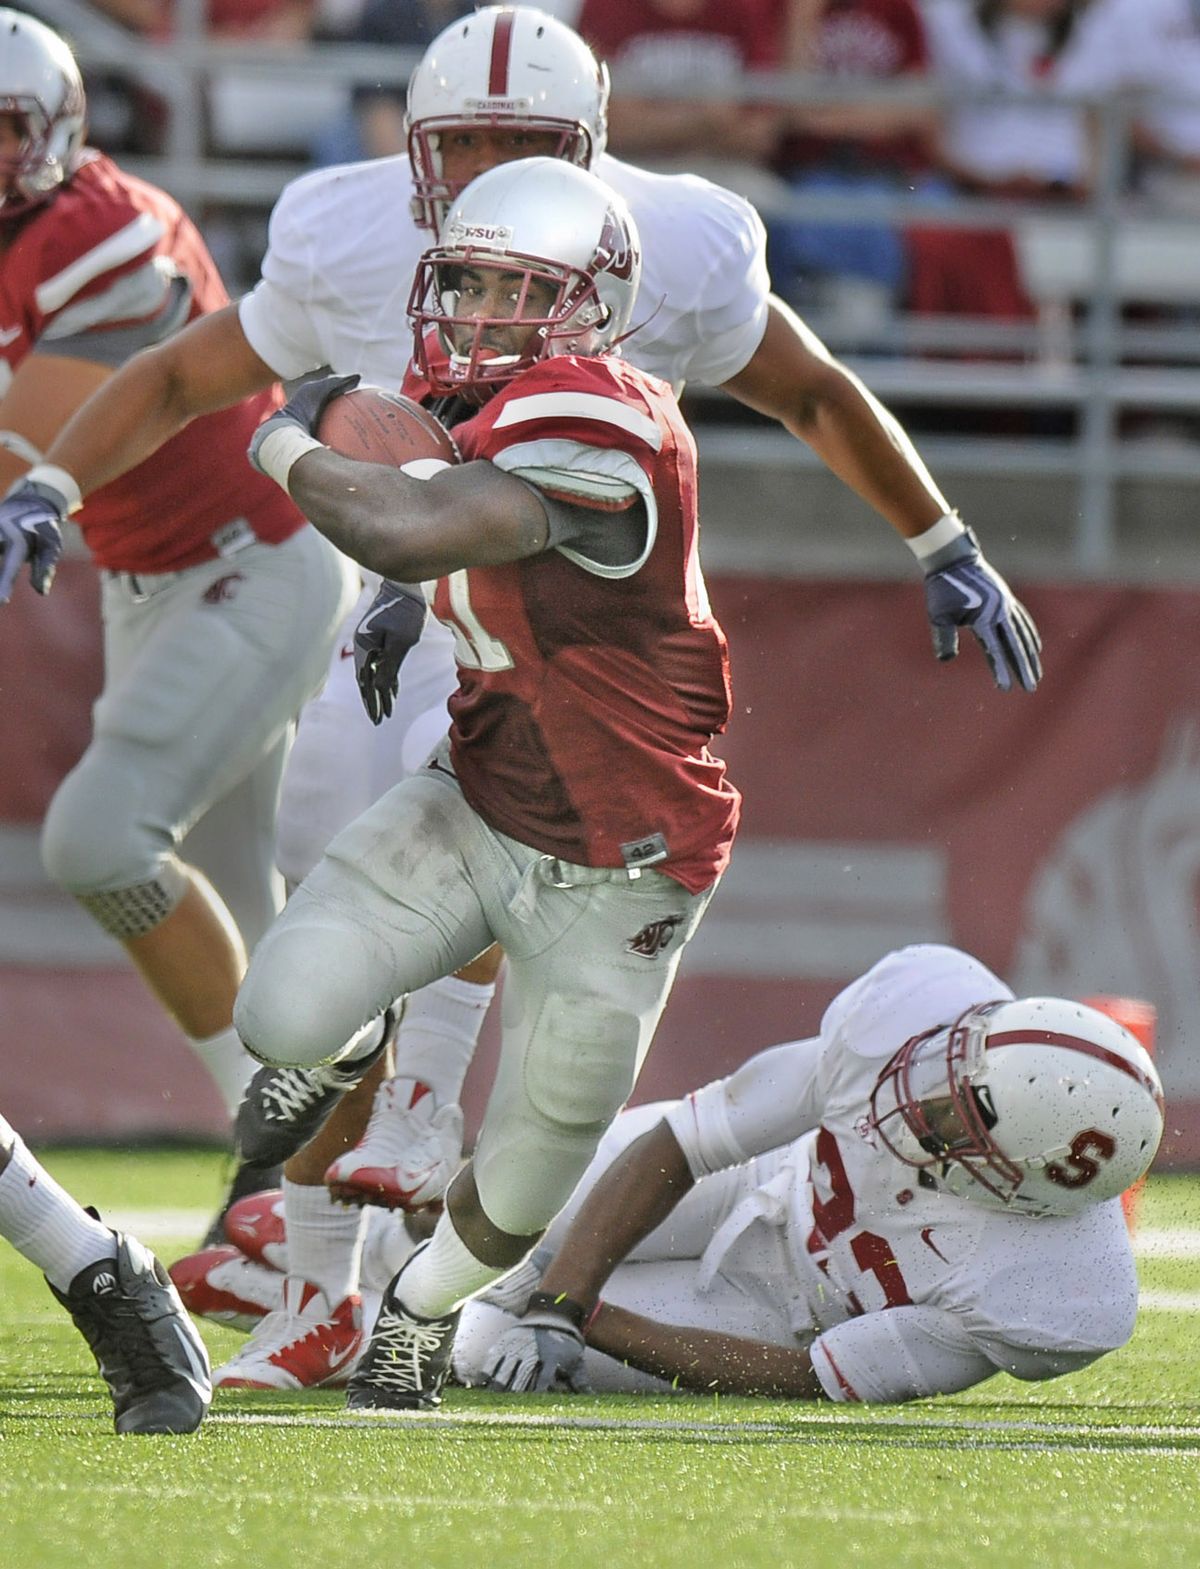 Cougars running back James Montgomery eludes a tackler. (Christopher Anderson / The Spokesman-Review)